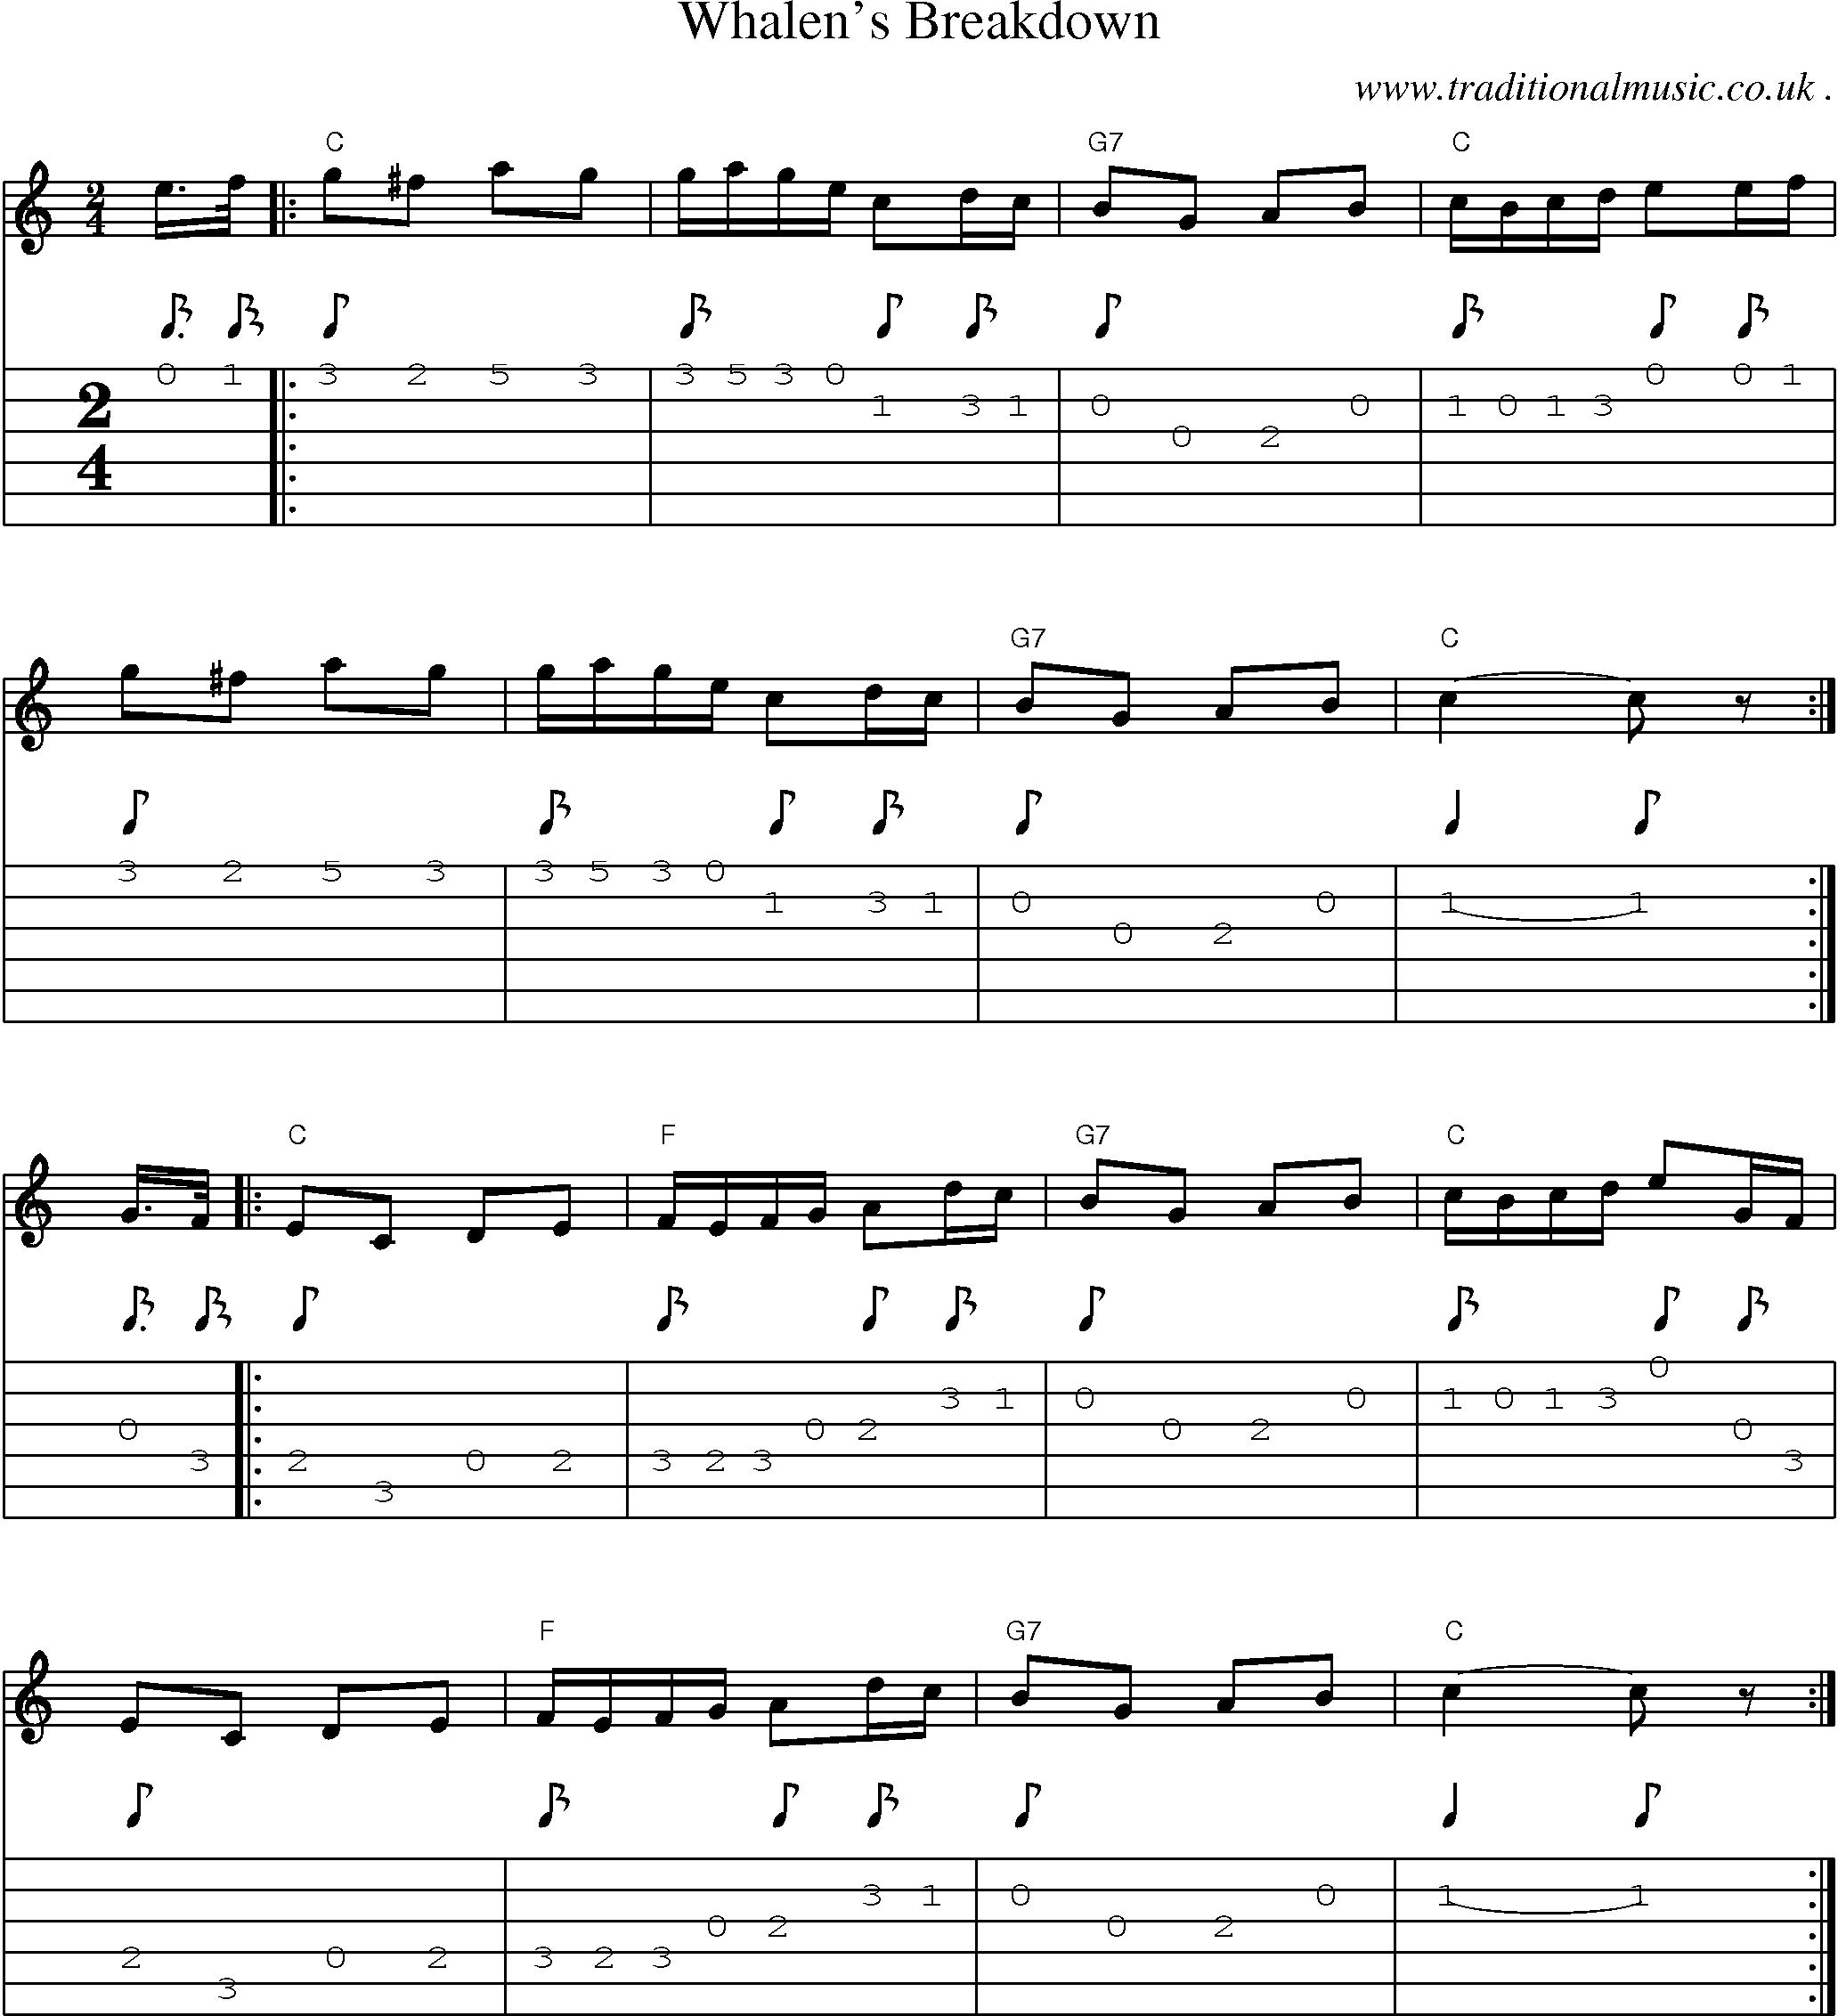 Sheet-Music and Guitar Tabs for Whalens Breakdown